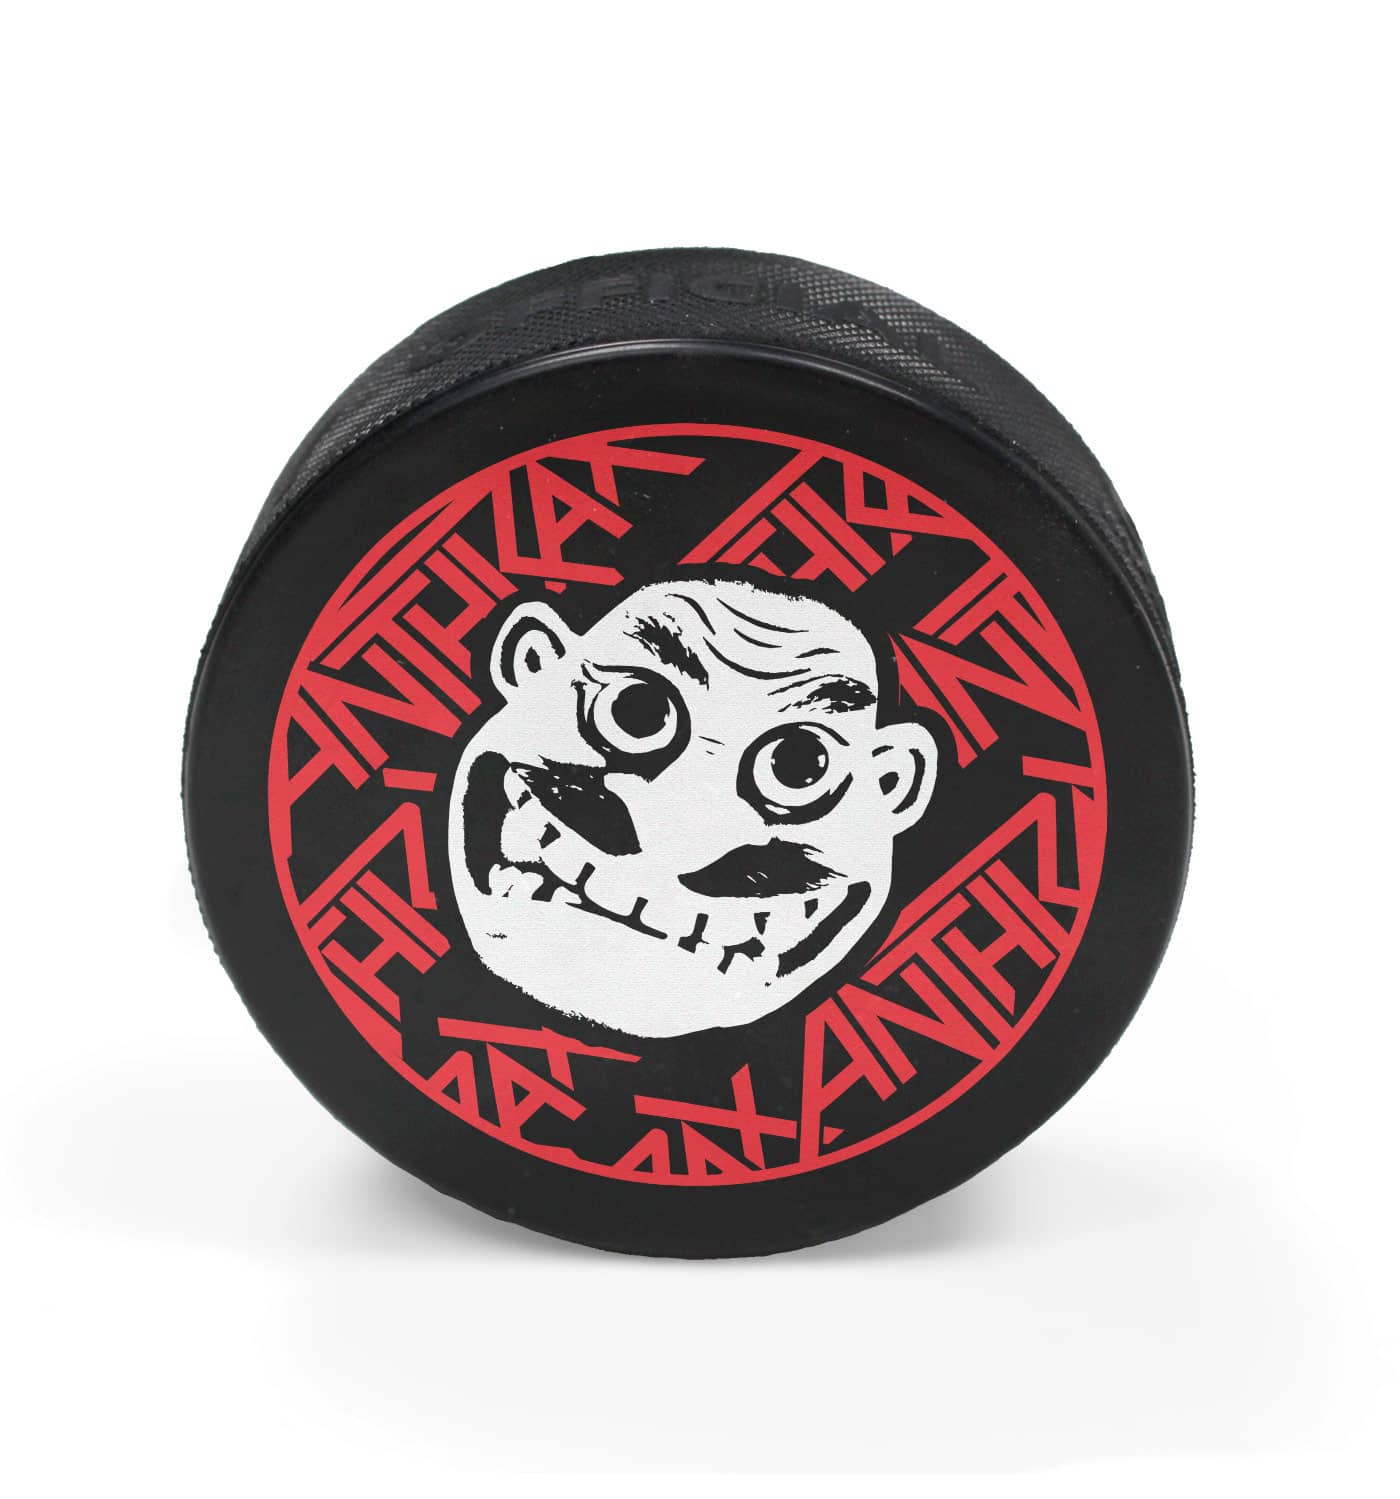 ANTHRAX 'NOT' limited edition hockey puck